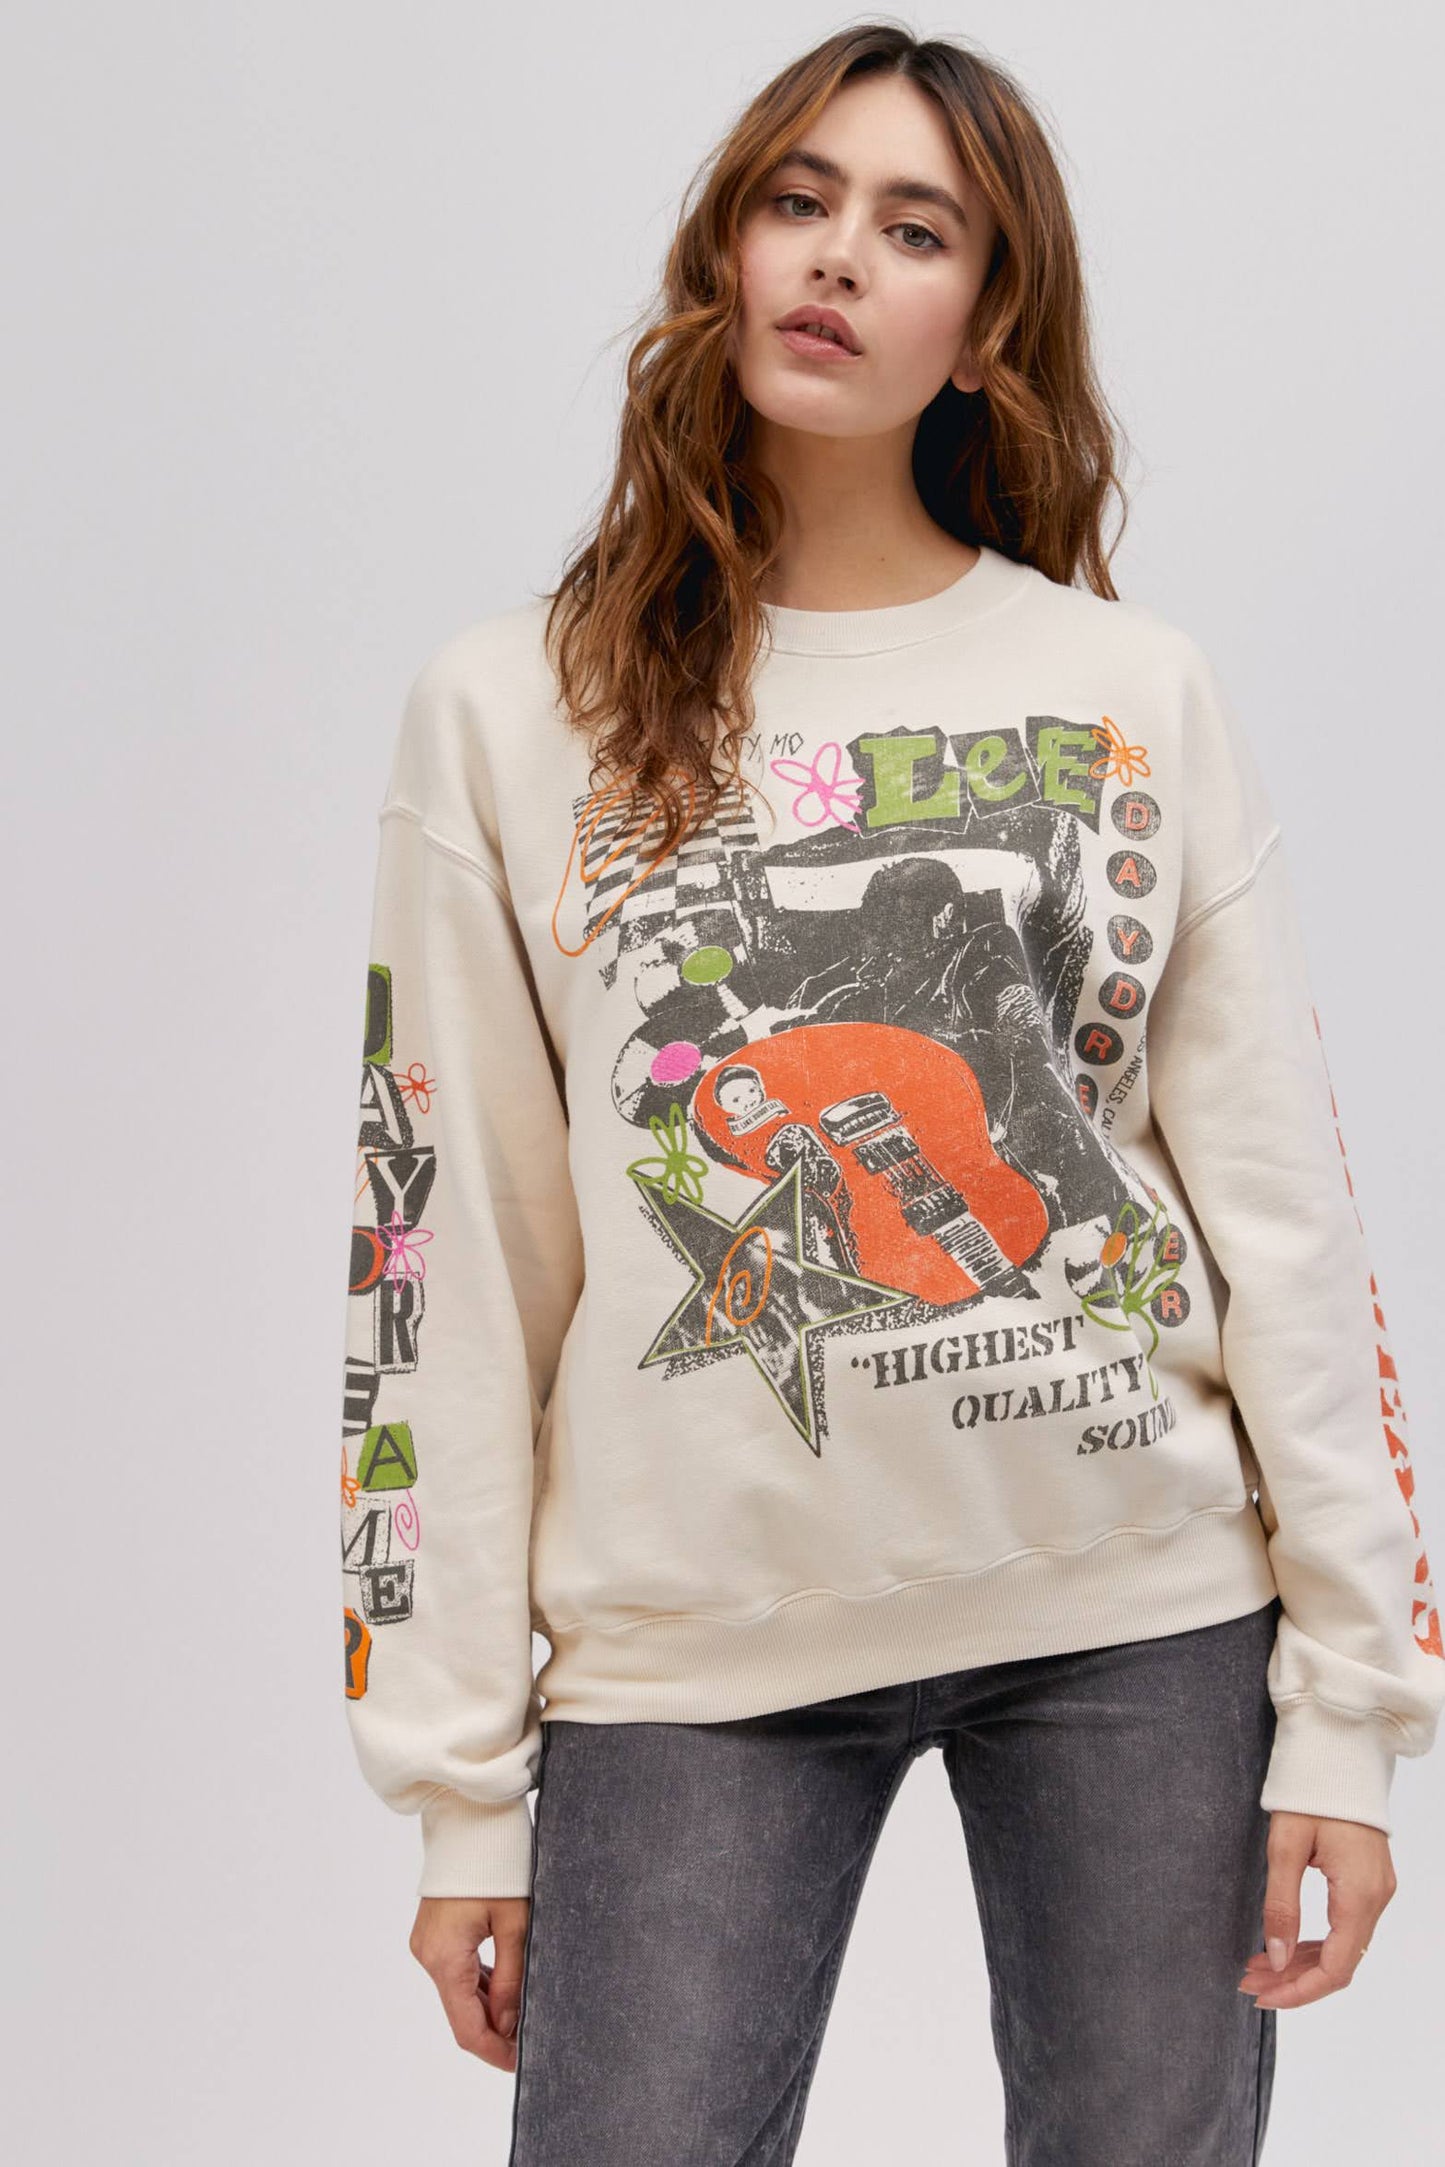 long haired model wearing off white colored sweatshirt with washed graphics